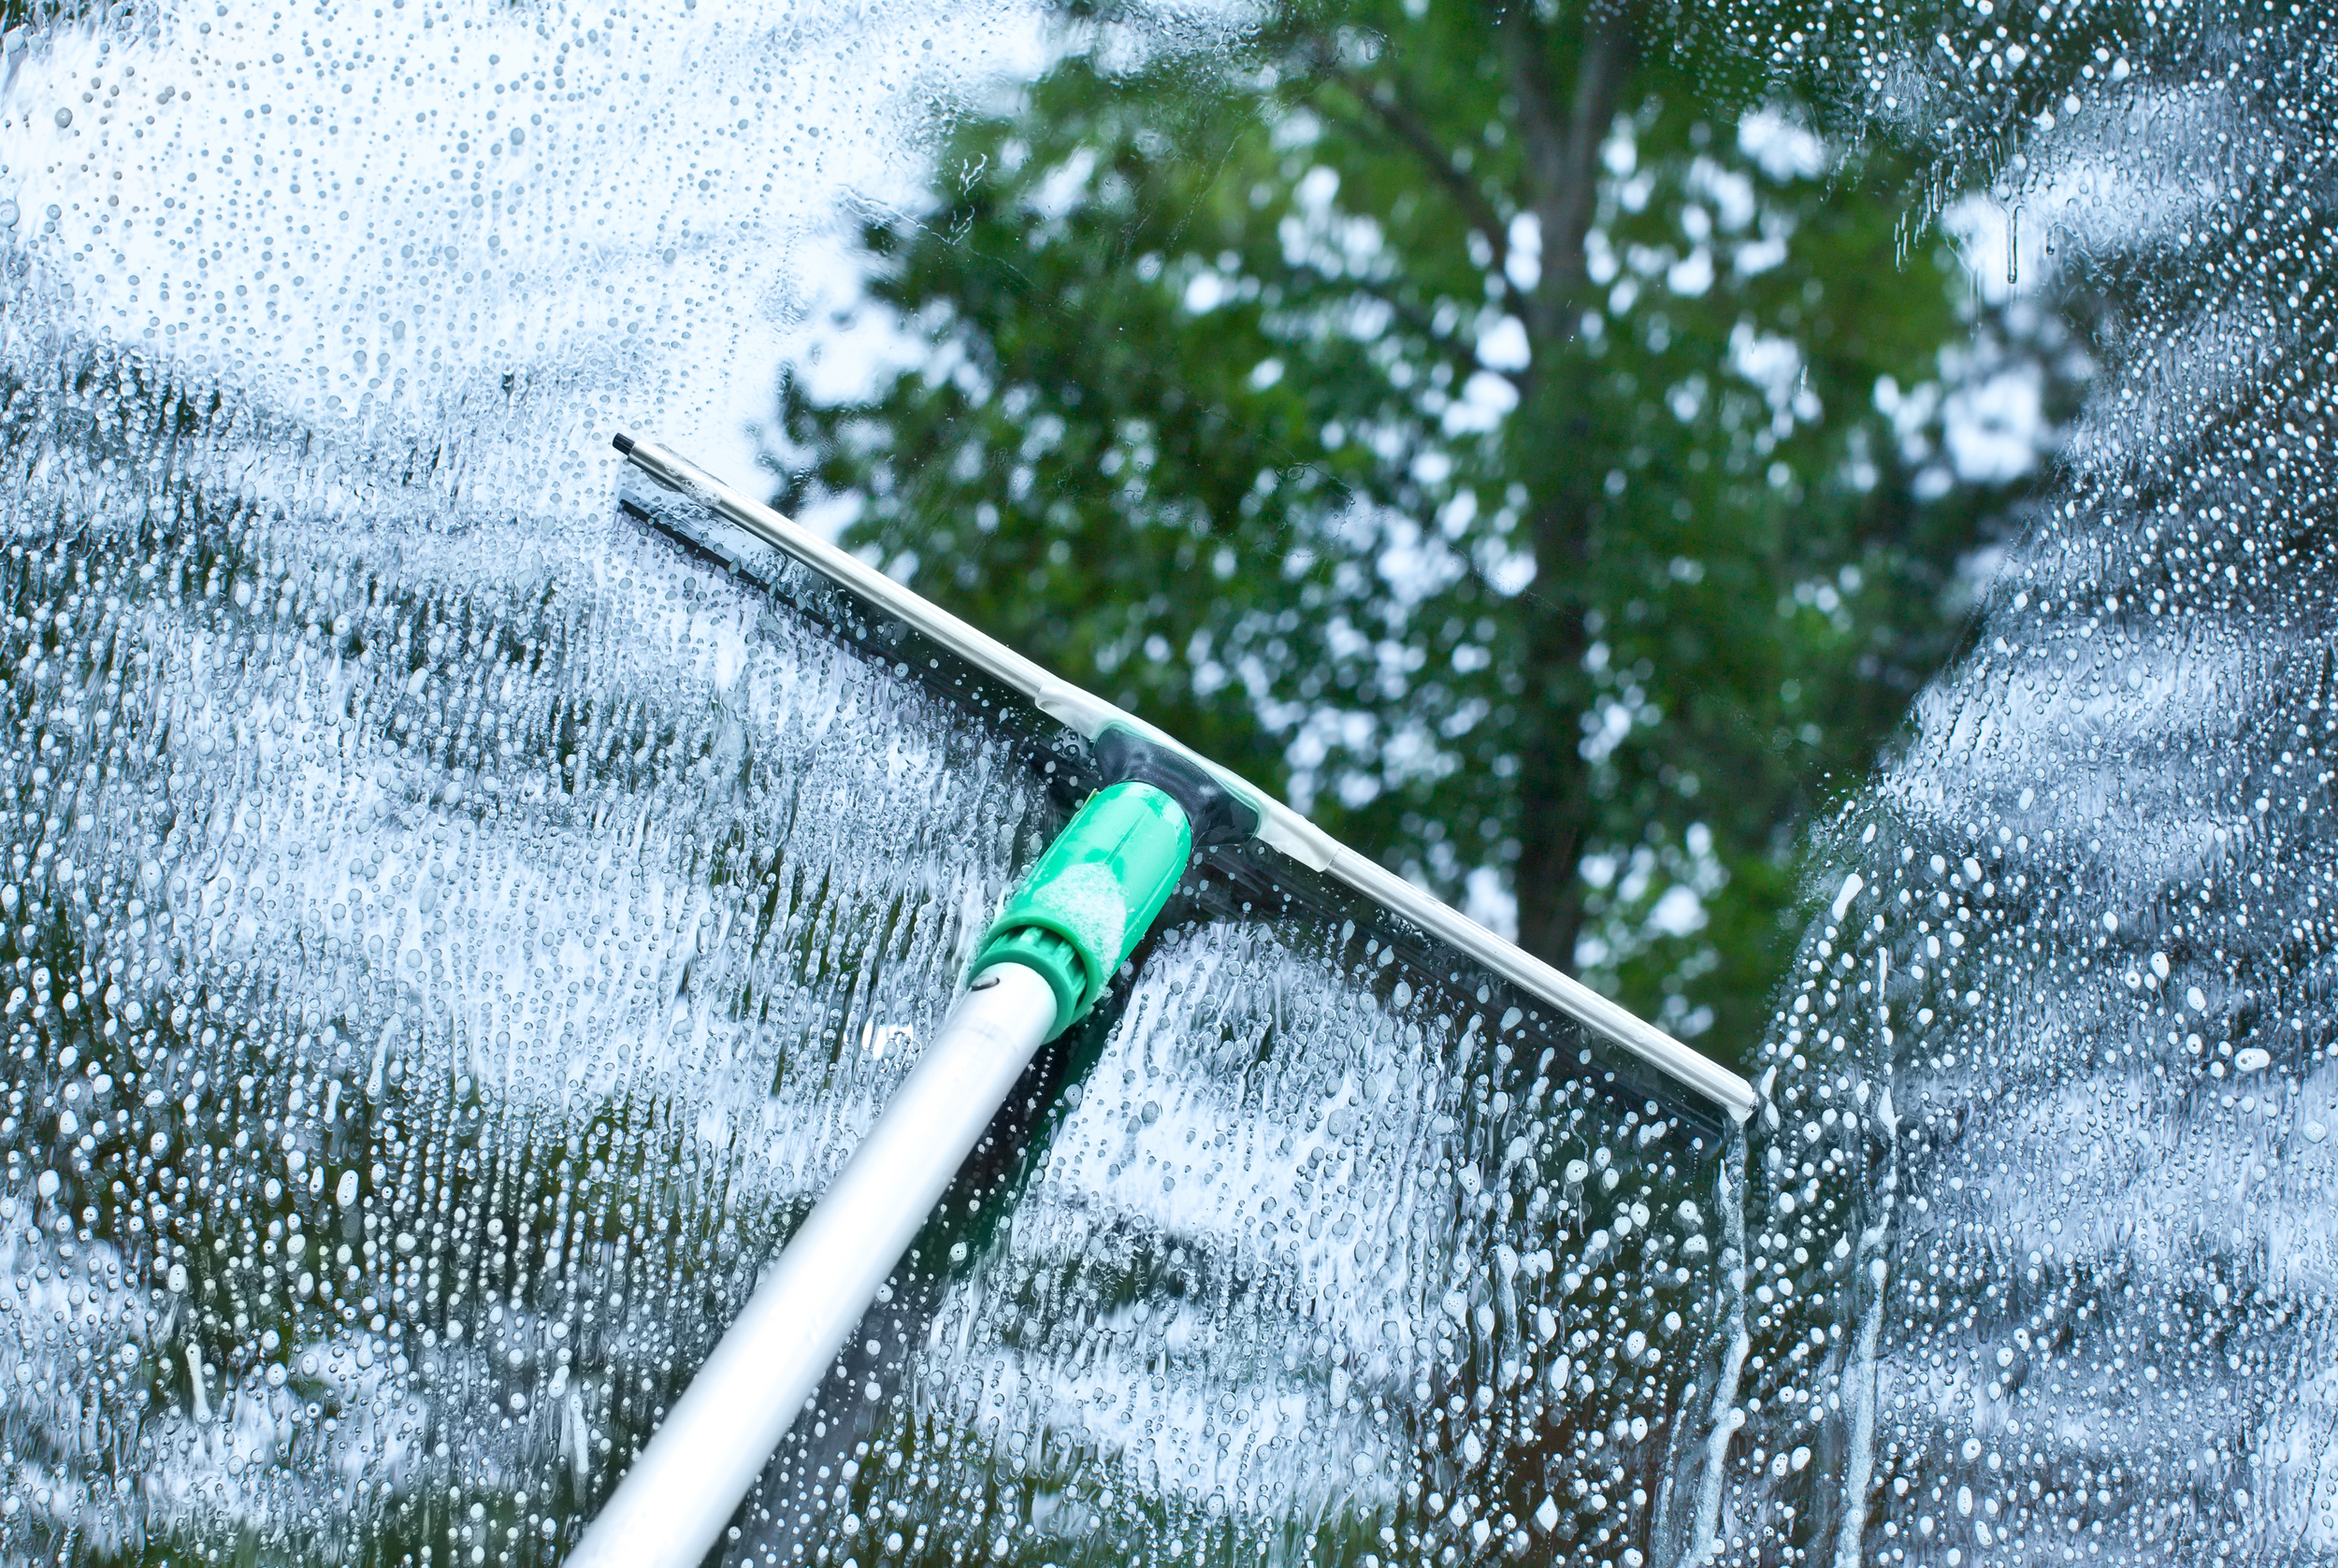   Bring a bright shine to your homes appearance   Professional Residential &amp; Commercial   Window Cleaning | Power Washing | Gutter Cleaning   (914) 406-9287    Click to Call  